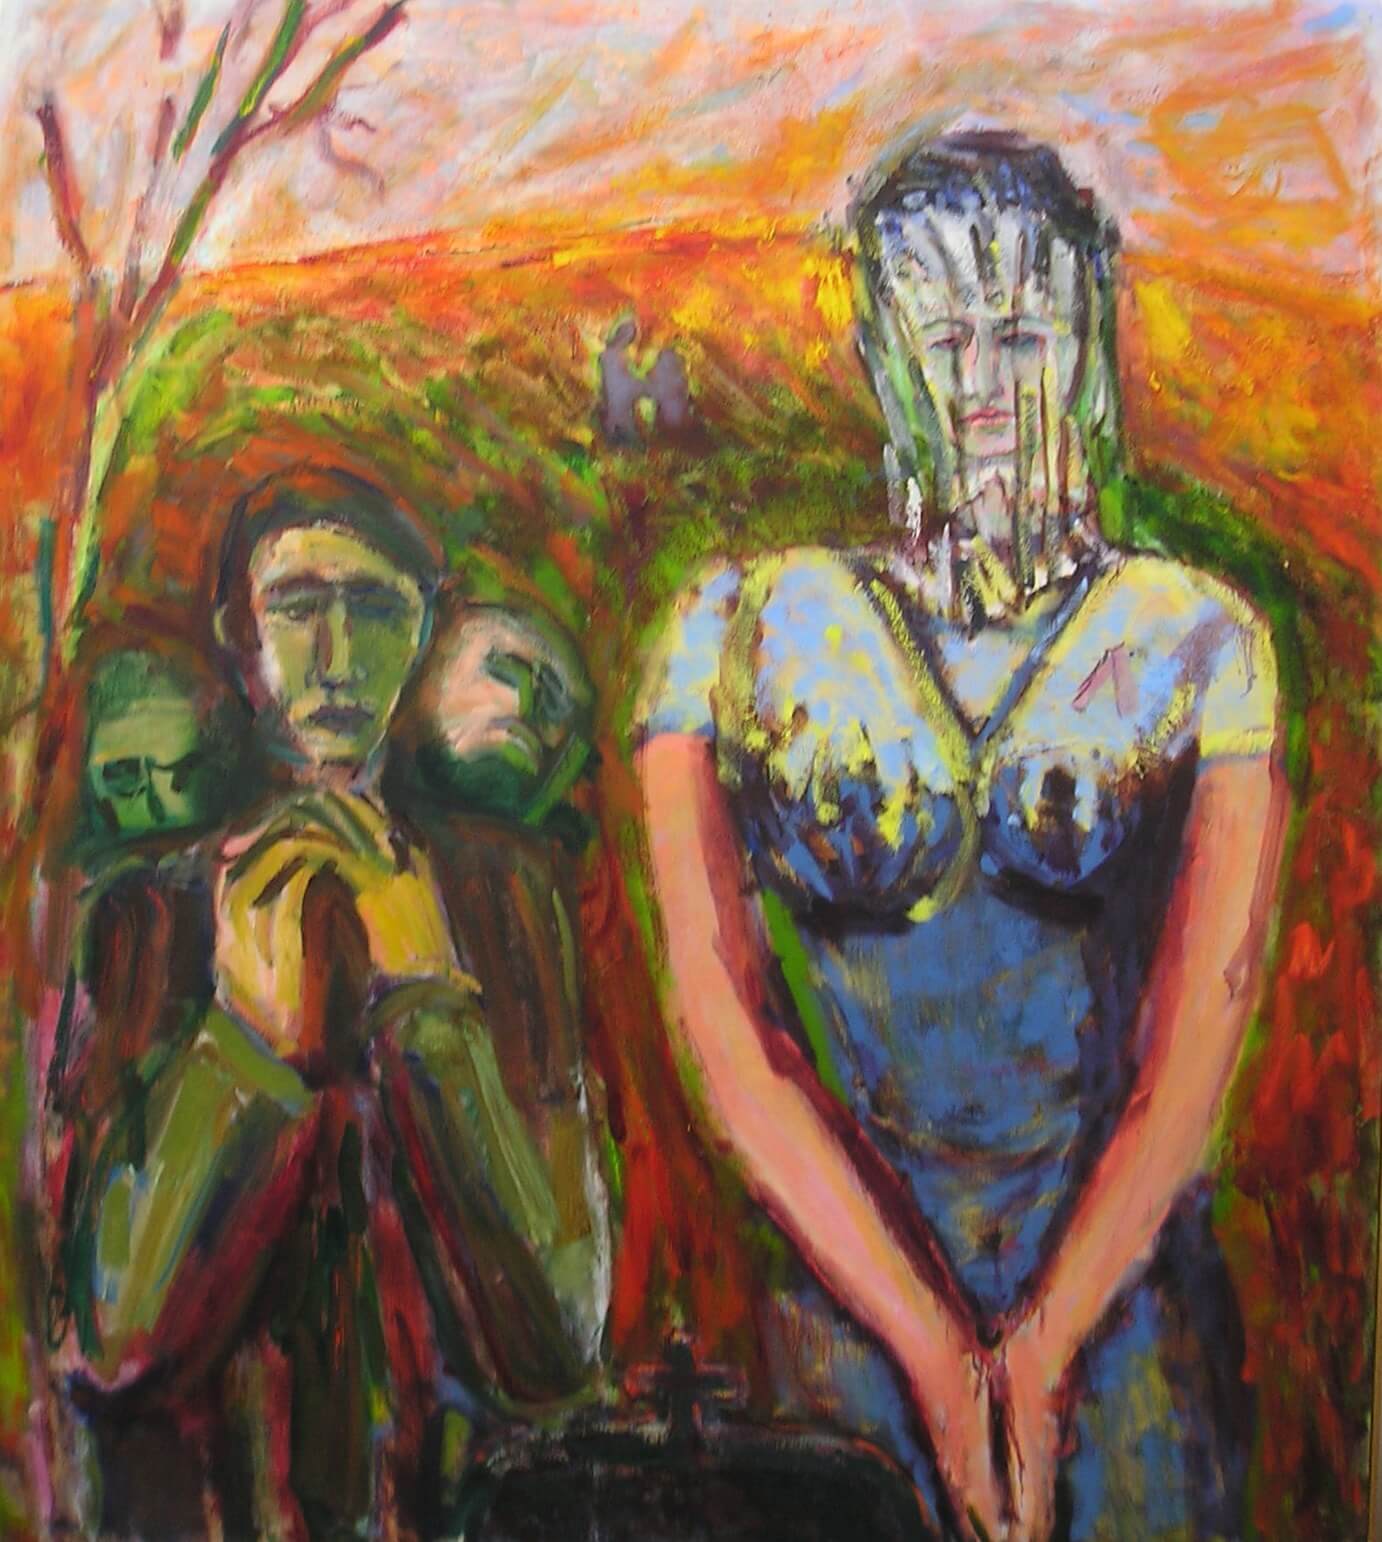 Paying Respects, Oil on Canvas - Figurative